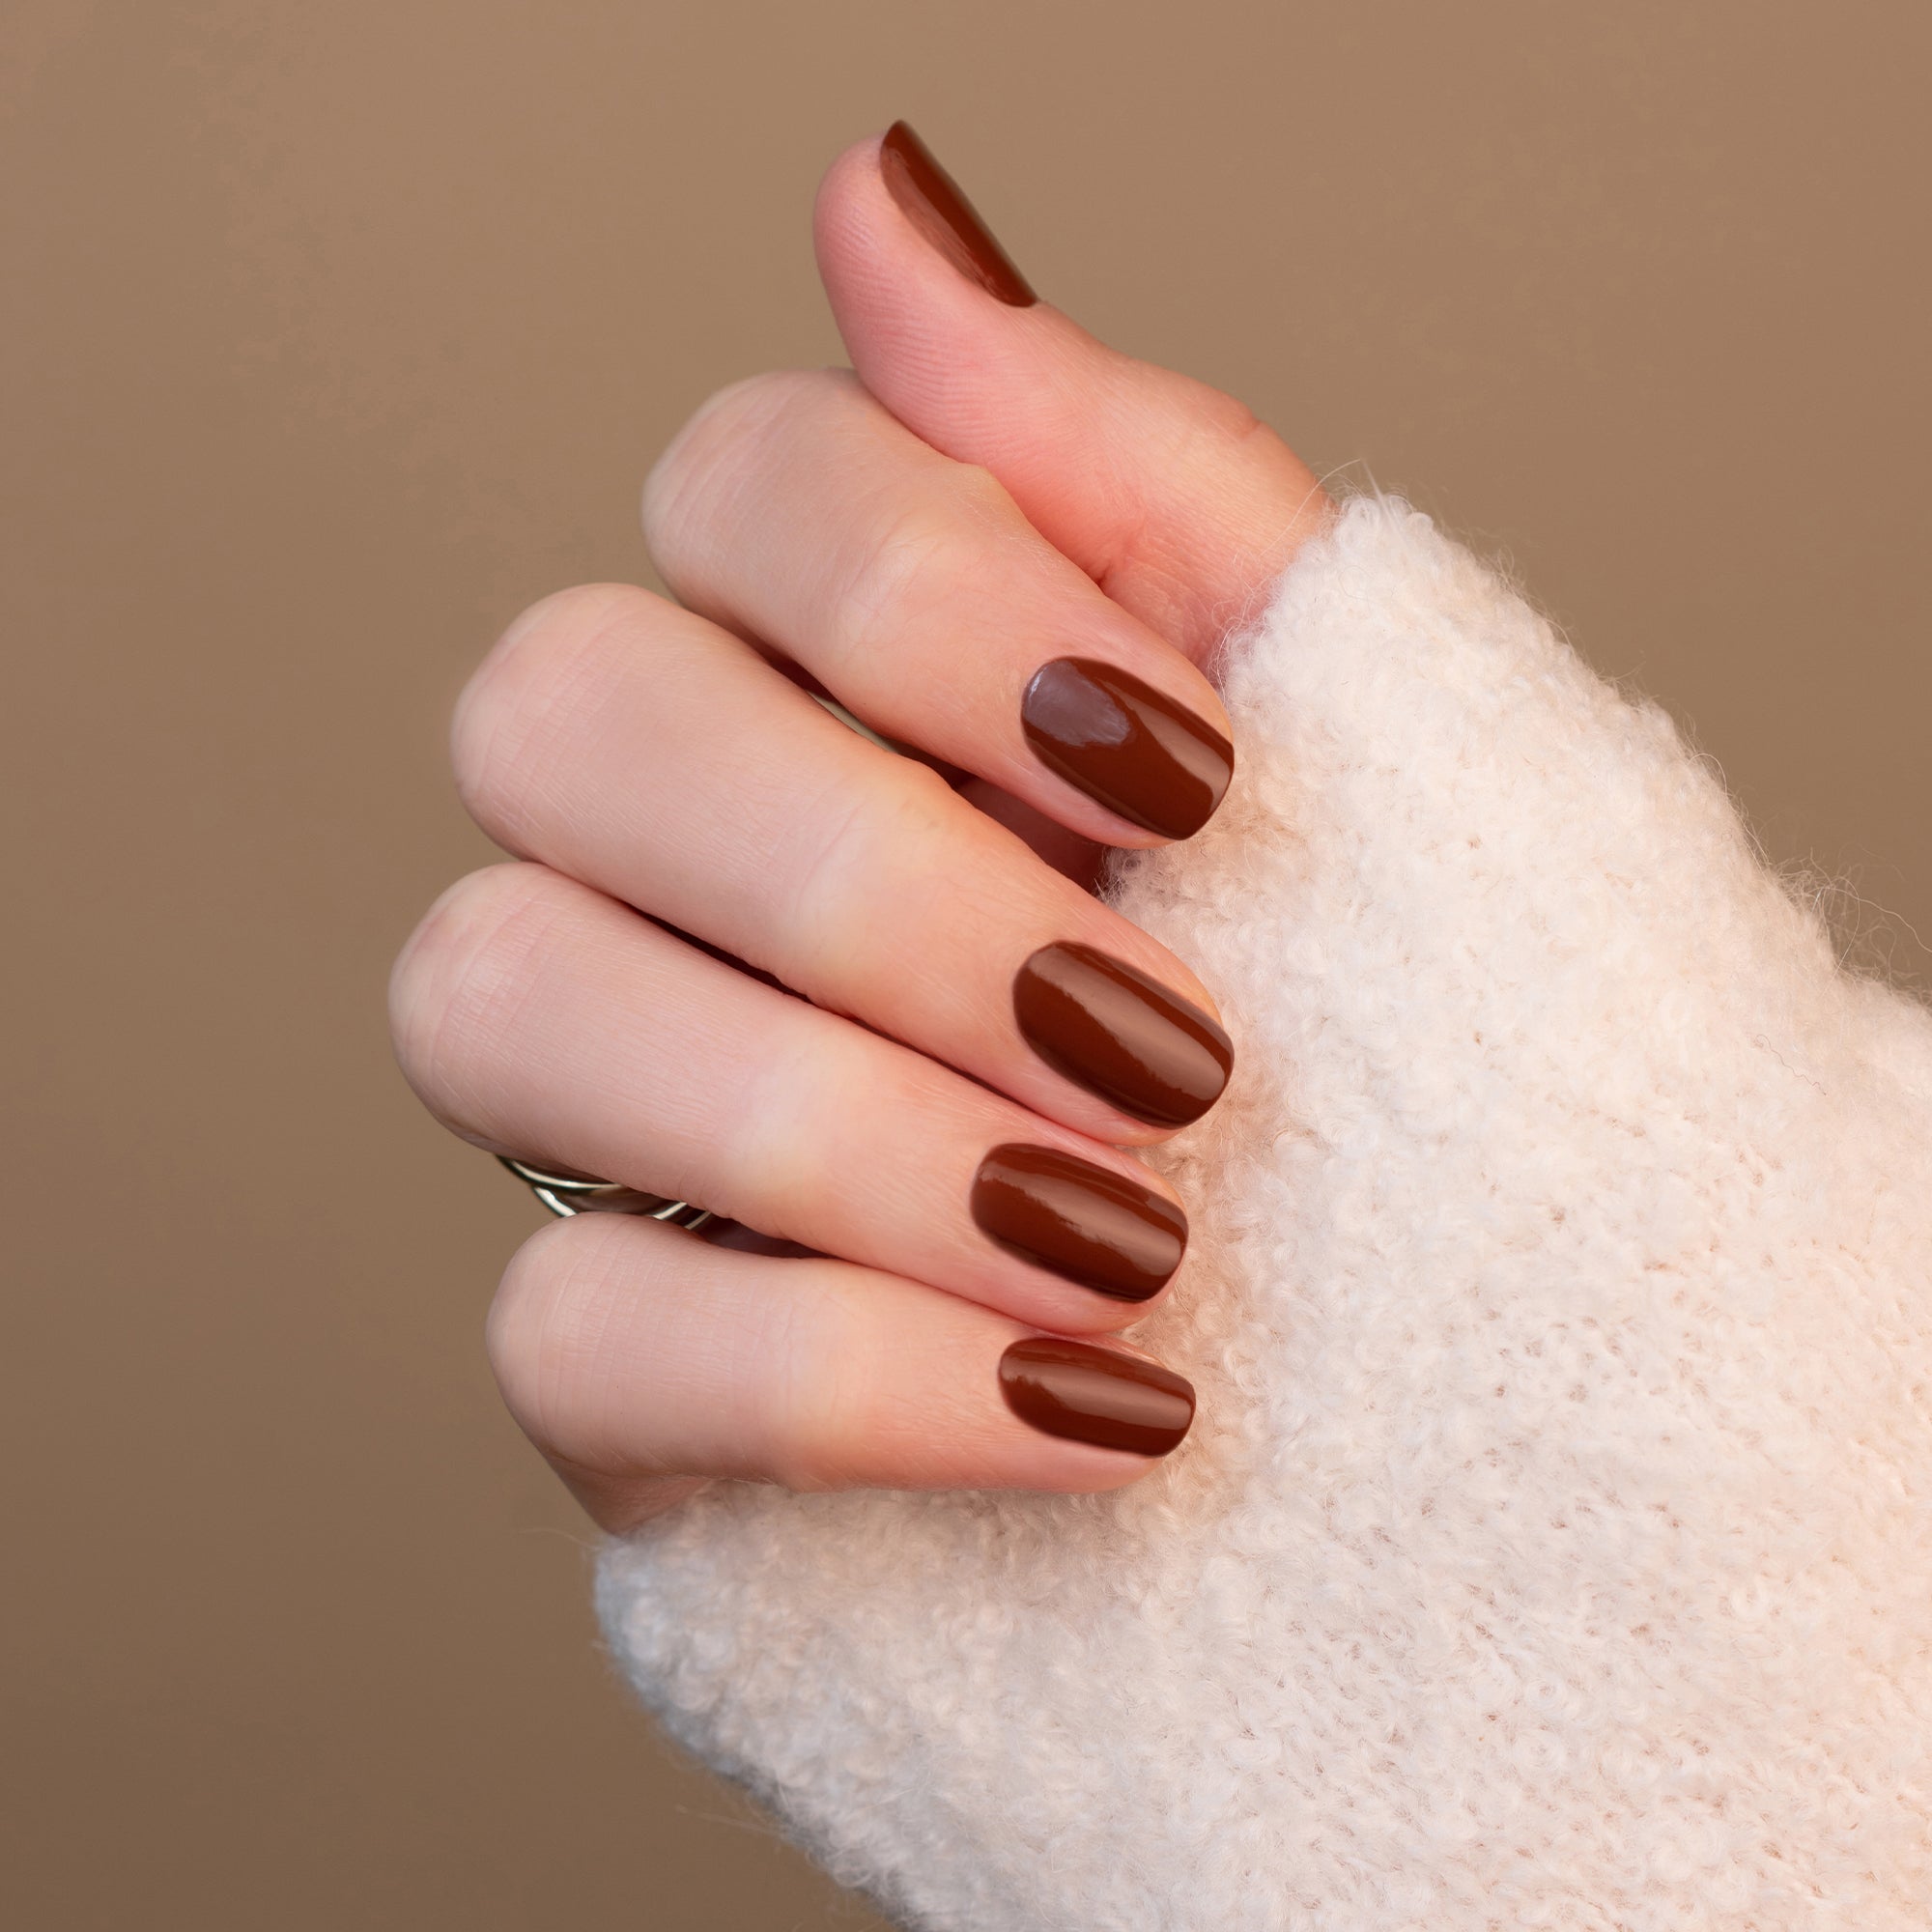 Hard Gel vs Soft Gel Nails: What's the Difference? | Makeup.com